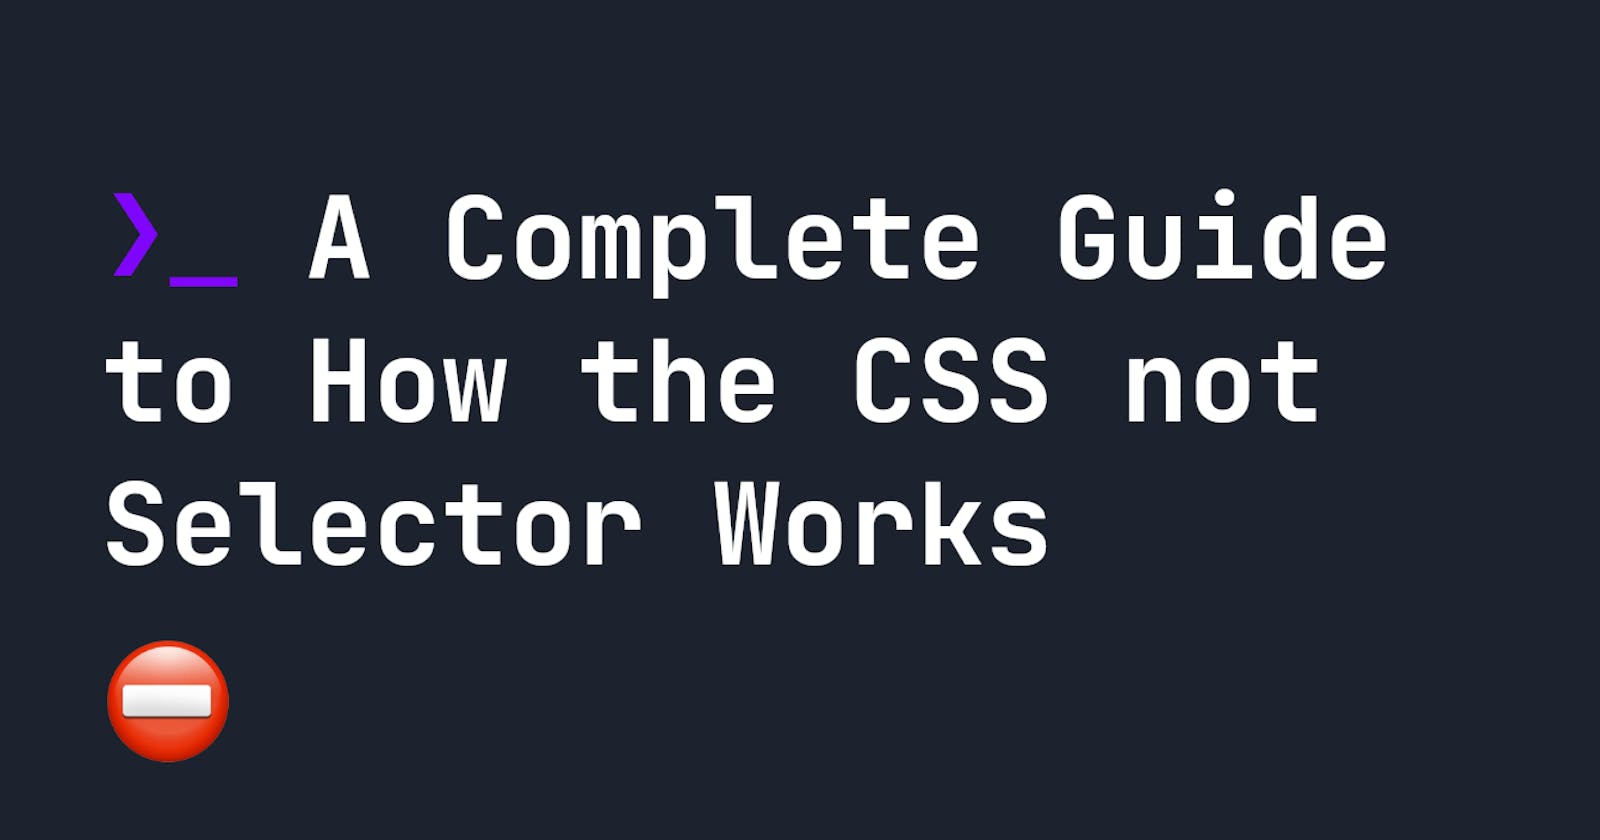 A Complete Guide to How the CSS not Selector Works